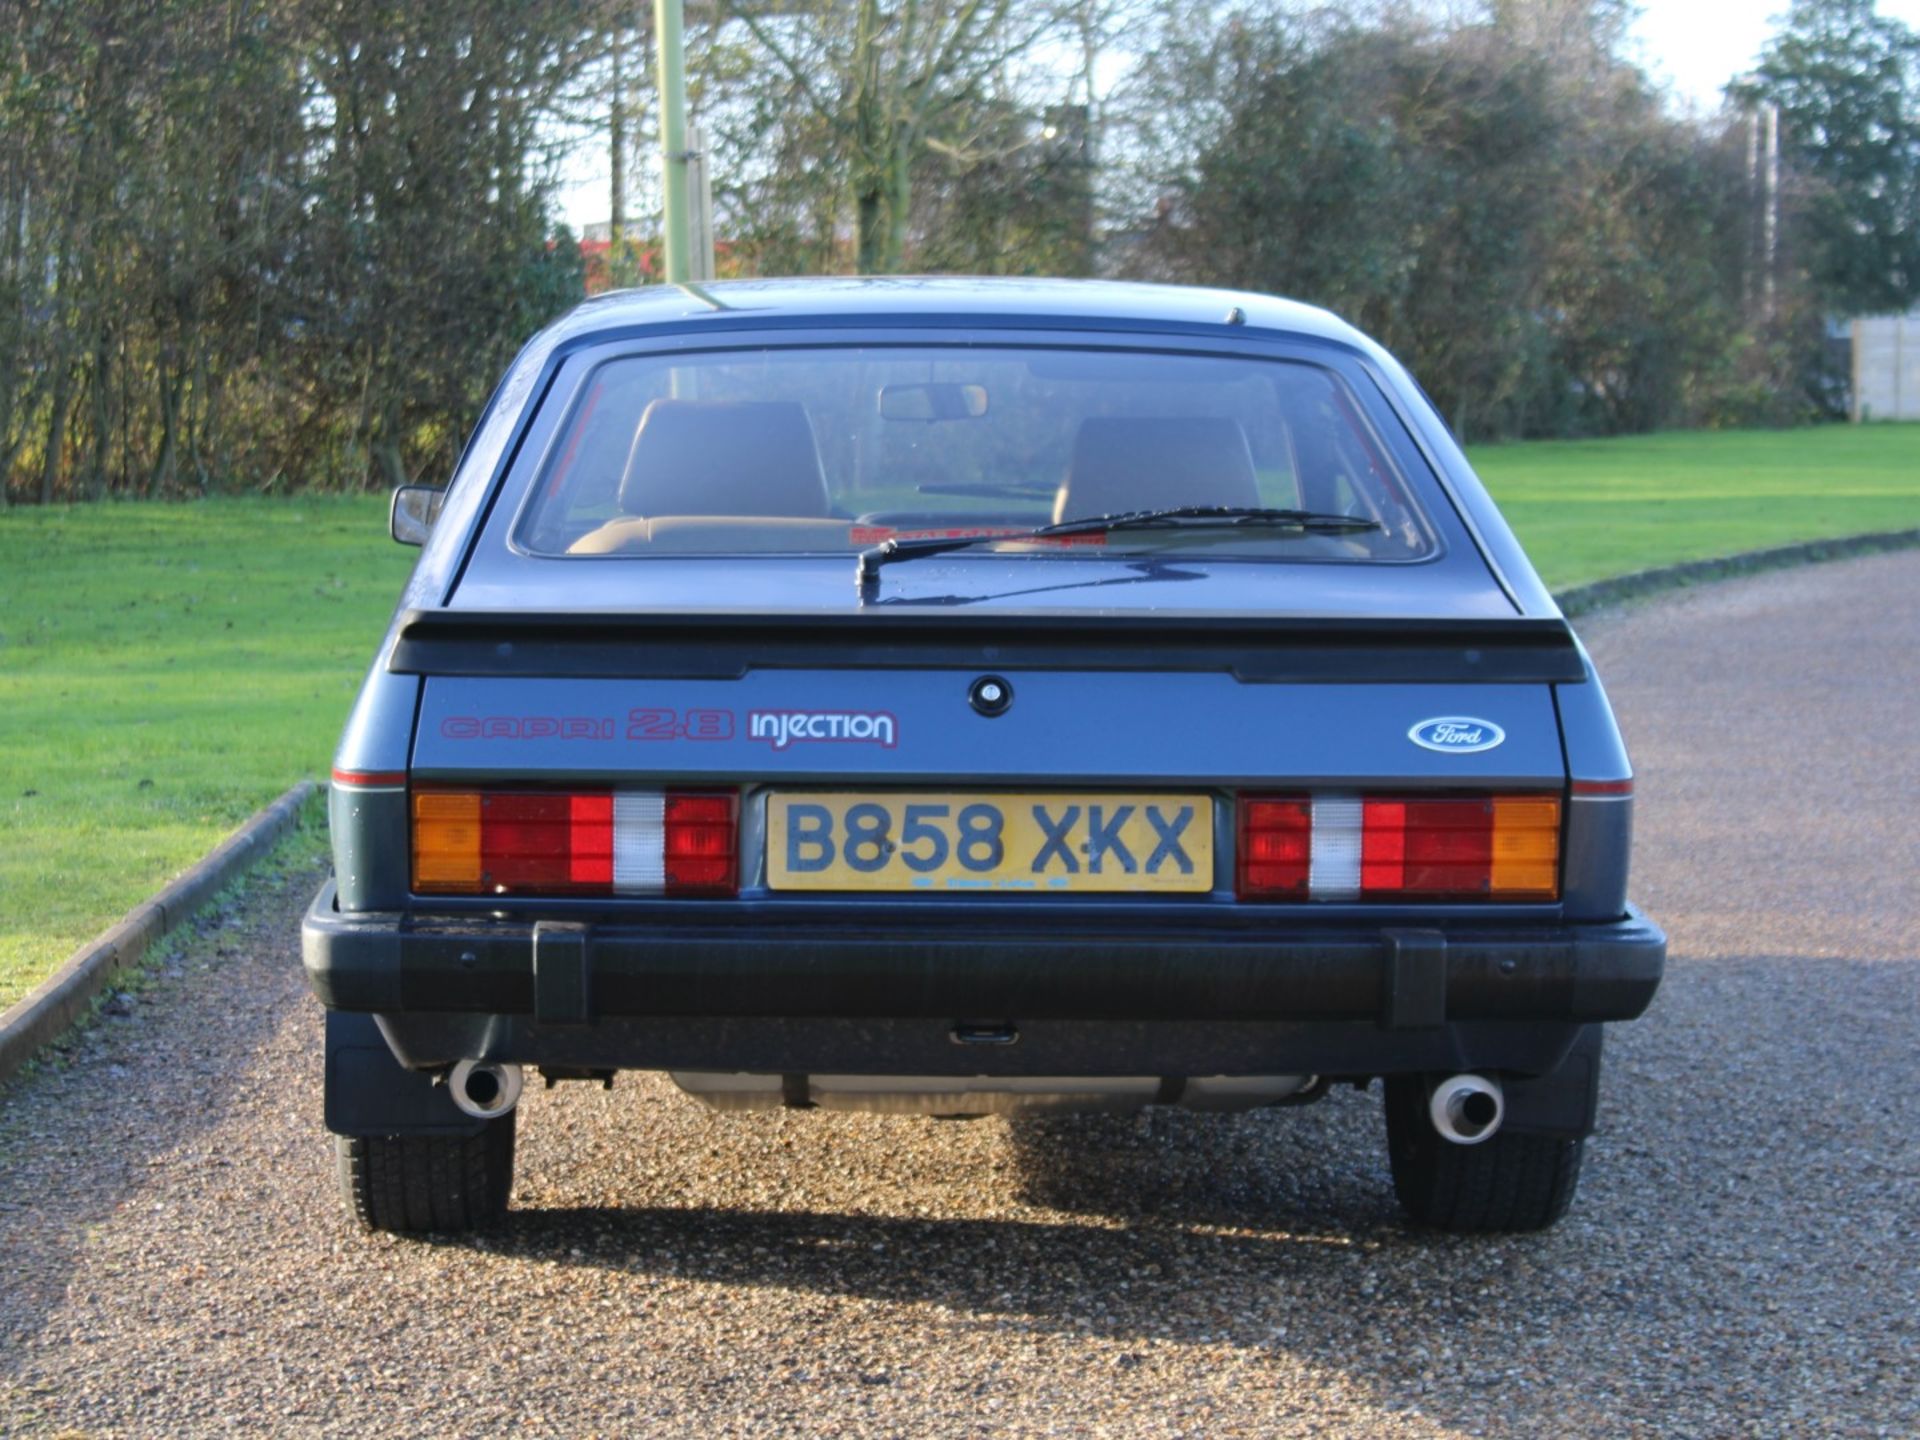 1985 Ford Capri 2.8 Injection Special 28,460 miles from new - Image 5 of 24